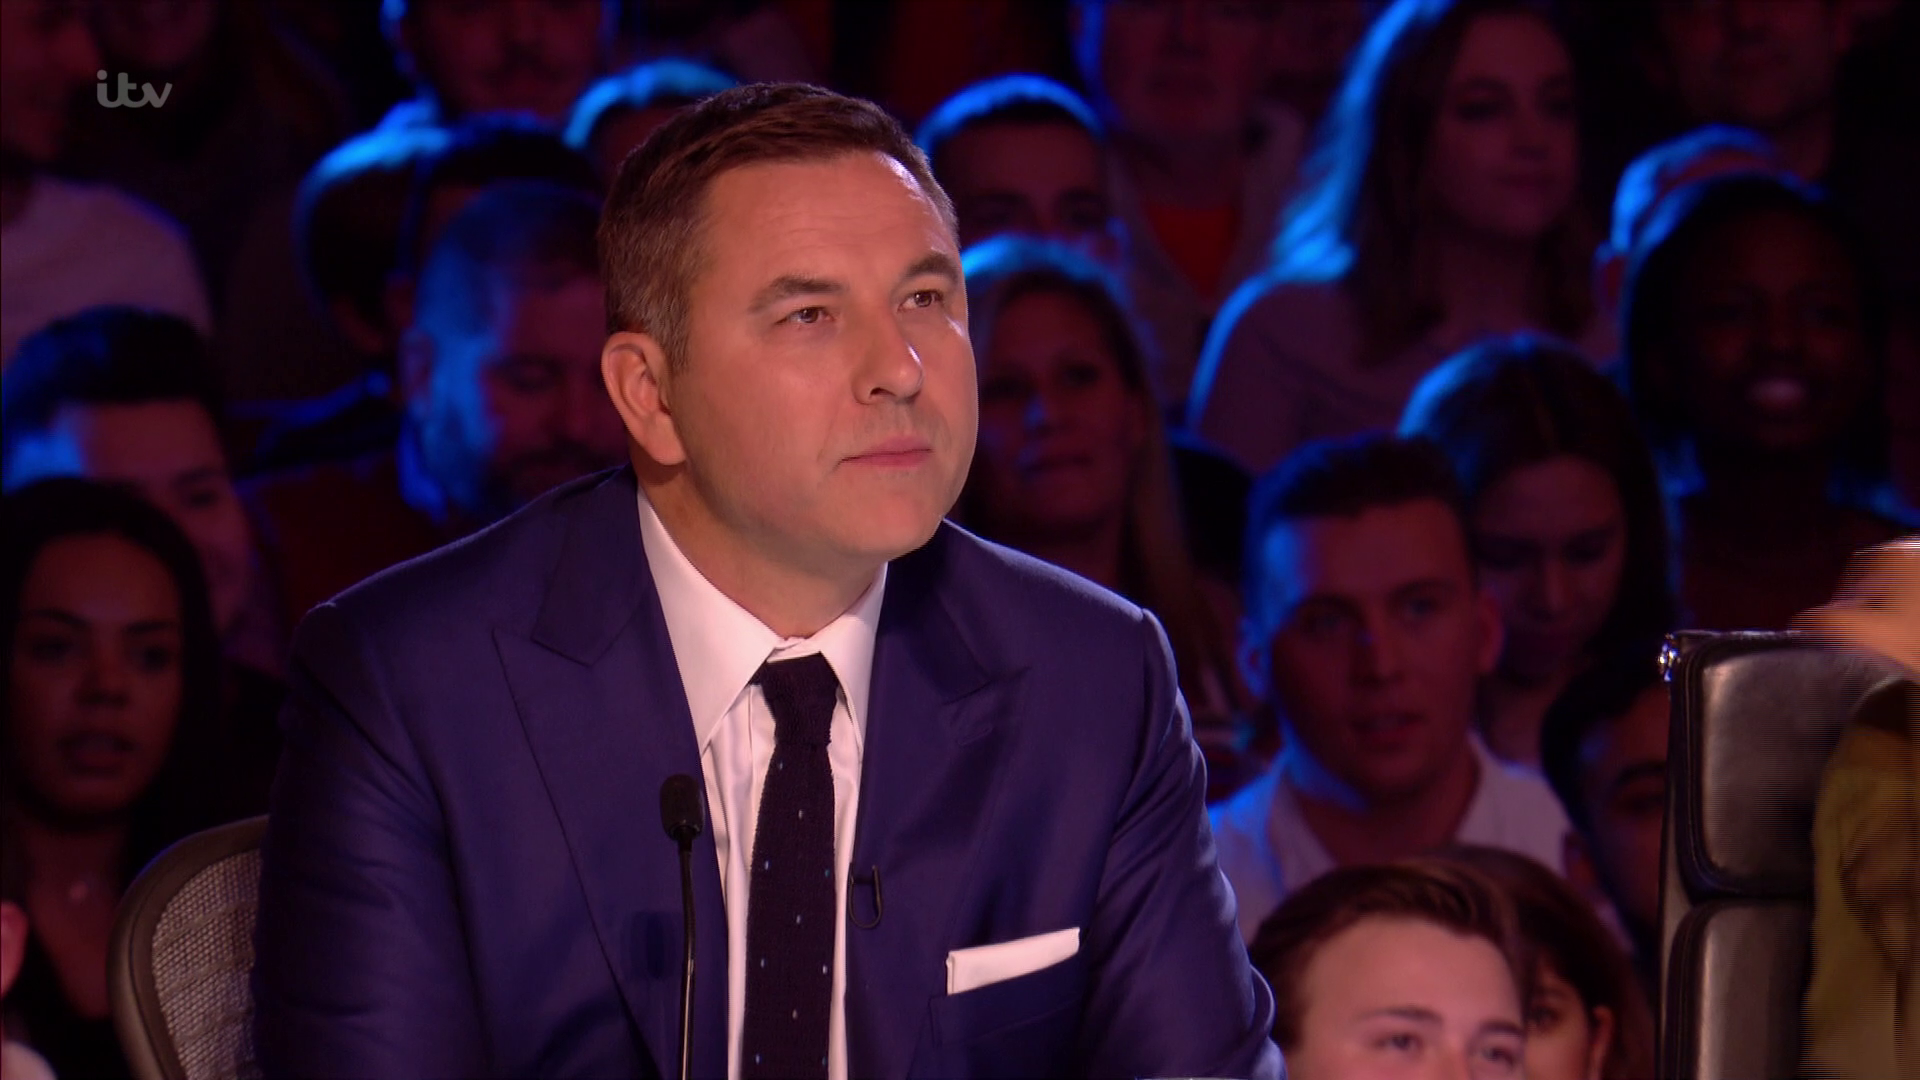 David Walliams reveals real reason he has a different chair to